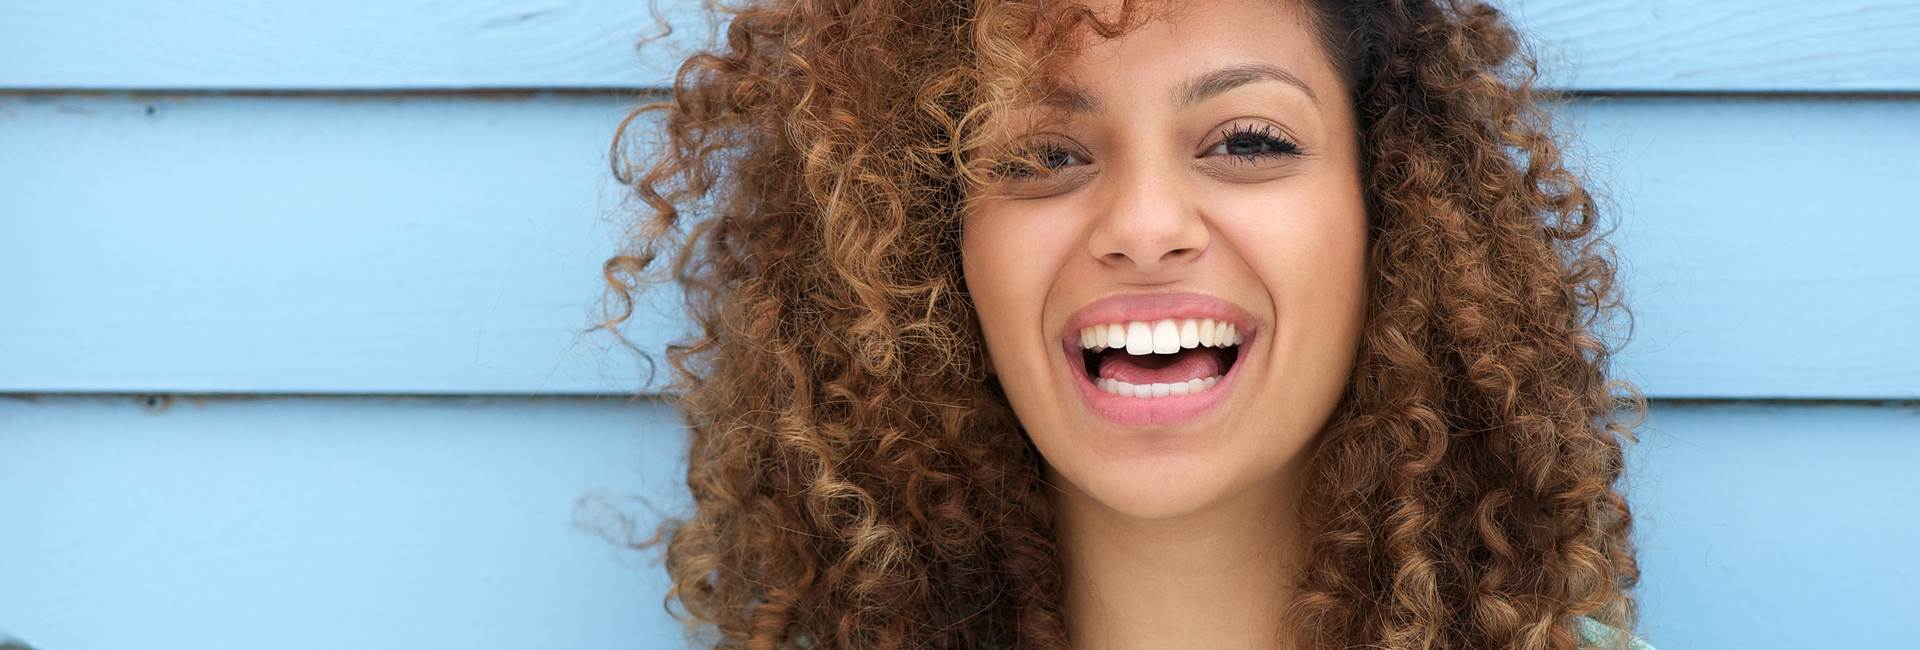 Beautiful woman smiling after Tooth Fillings and Bonding